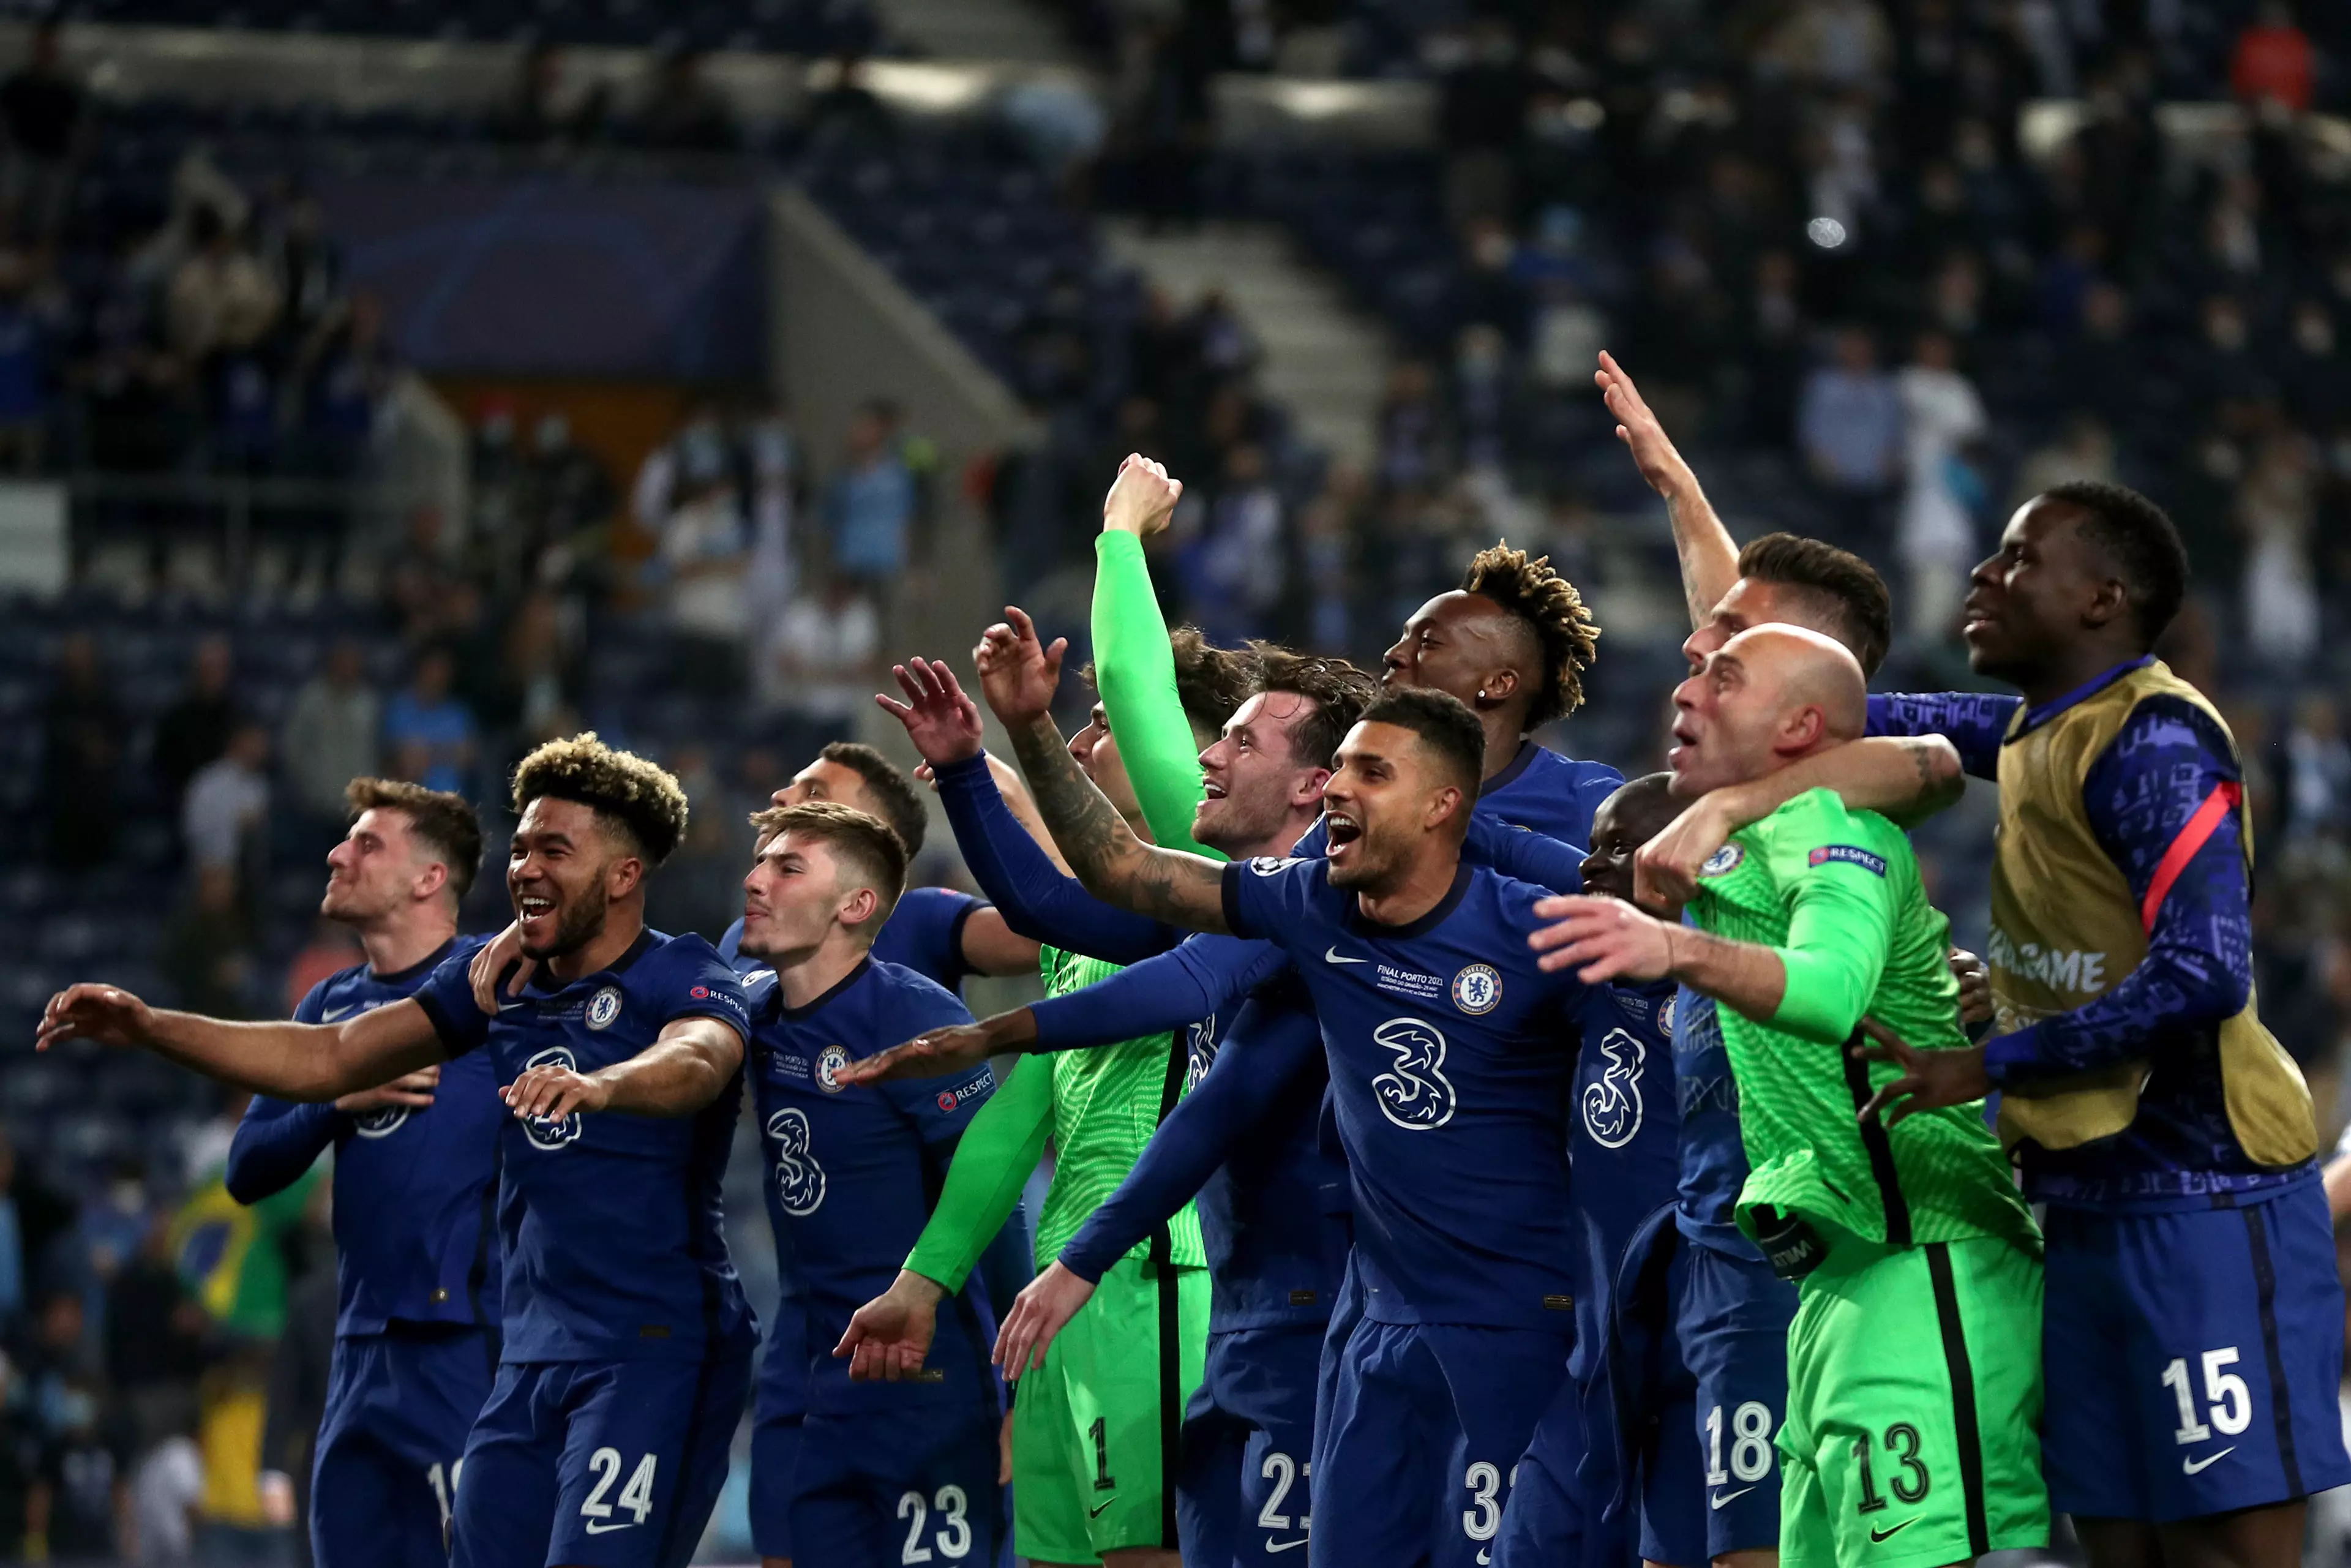 Chelsea players celebrate their Champions League final win with fans. Image: PA Images